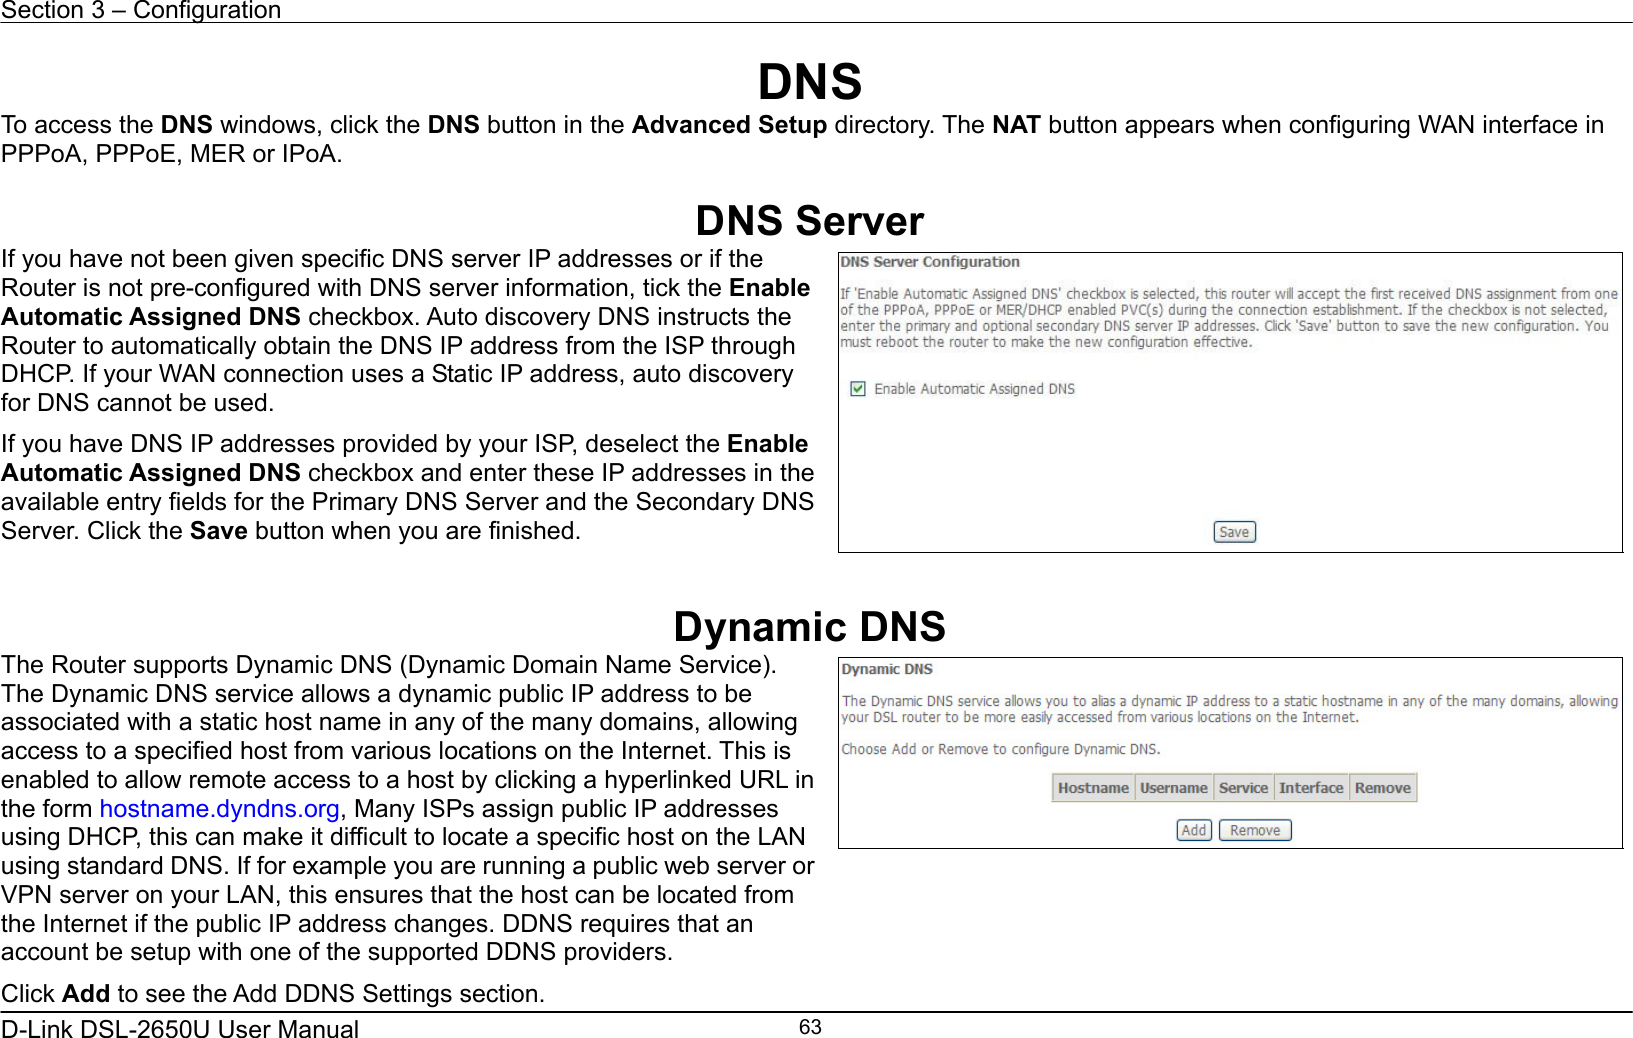 Section 3 – Configuration   D-Link DSL-2650U User Manual    63DNS To access the DNS windows, click the DNS button in the Advanced Setup directory. The NAT button appears when configuring WAN interface in PPPoA, PPPoE, MER or IPoA.  DNS Server If you have not been given specific DNS server IP addresses or if the Router is not pre-configured with DNS server information, tick the Enable Automatic Assigned DNS checkbox. Auto discovery DNS instructs the Router to automatically obtain the DNS IP address from the ISP through DHCP. If your WAN connection uses a Static IP address, auto discovery for DNS cannot be used. If you have DNS IP addresses provided by your ISP, deselect the Enable Automatic Assigned DNS checkbox and enter these IP addresses in the available entry fields for the Primary DNS Server and the Secondary DNS Server. Click the Save button when you are finished.    Dynamic DNS The Router supports Dynamic DNS (Dynamic Domain Name Service). The Dynamic DNS service allows a dynamic public IP address to be associated with a static host name in any of the many domains, allowing access to a specified host from various locations on the Internet. This is enabled to allow remote access to a host by clicking a hyperlinked URL in the form hostname.dyndns.org, Many ISPs assign public IP addresses using DHCP, this can make it difficult to locate a specific host on the LAN using standard DNS. If for example you are running a public web server or VPN server on your LAN, this ensures that the host can be located from the Internet if the public IP address changes. DDNS requires that an account be setup with one of the supported DDNS providers. Click Add to see the Add DDNS Settings section.    